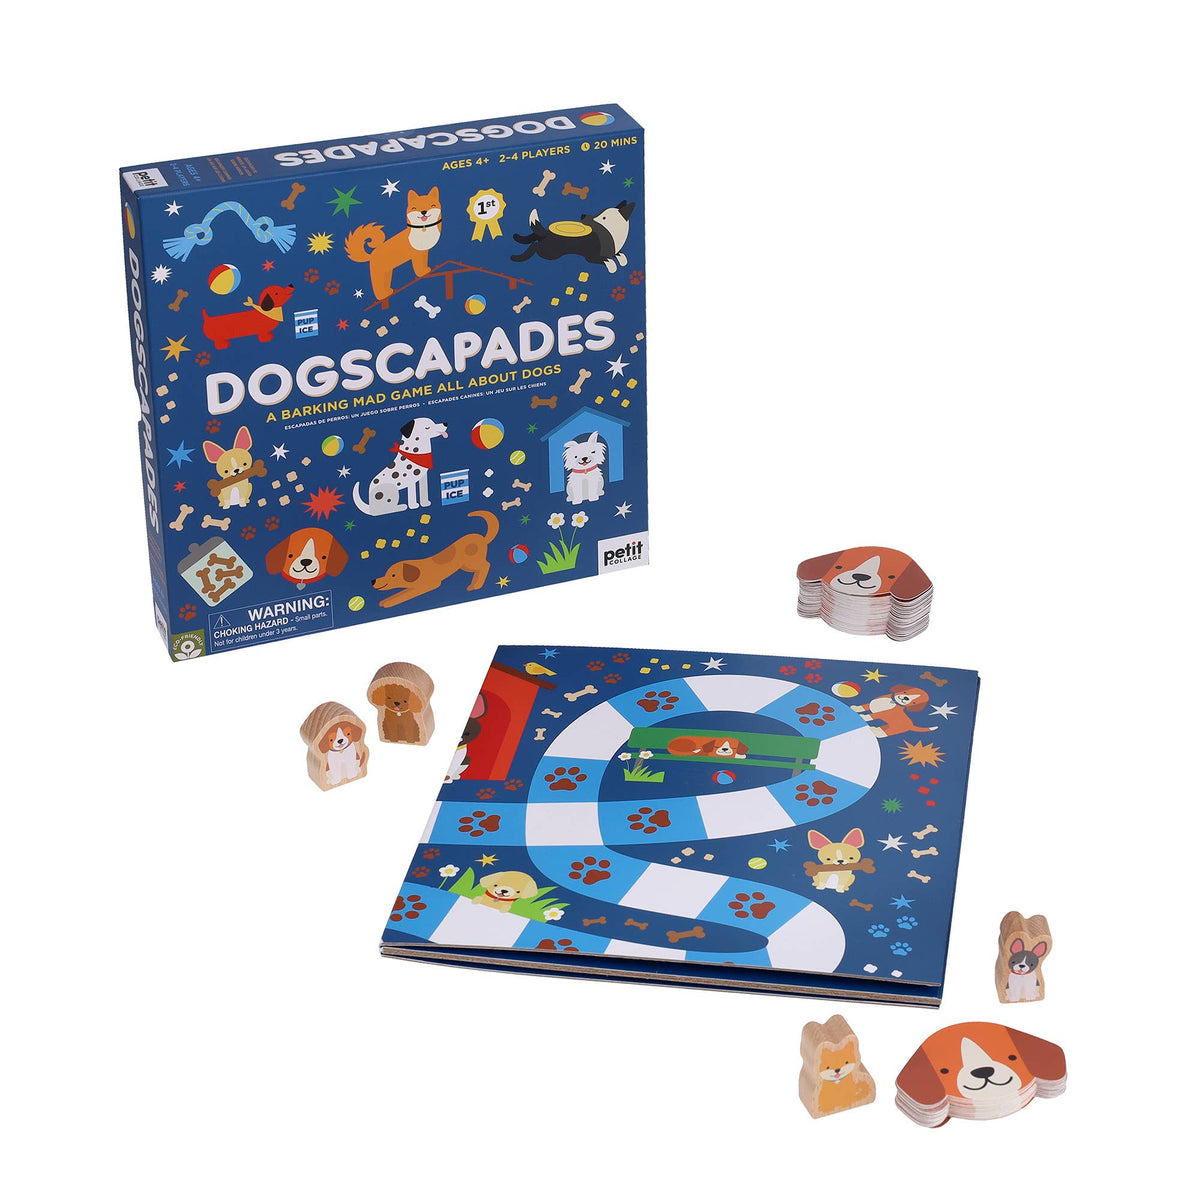 Dogscapades: A Barking Mad Game All About Dogs